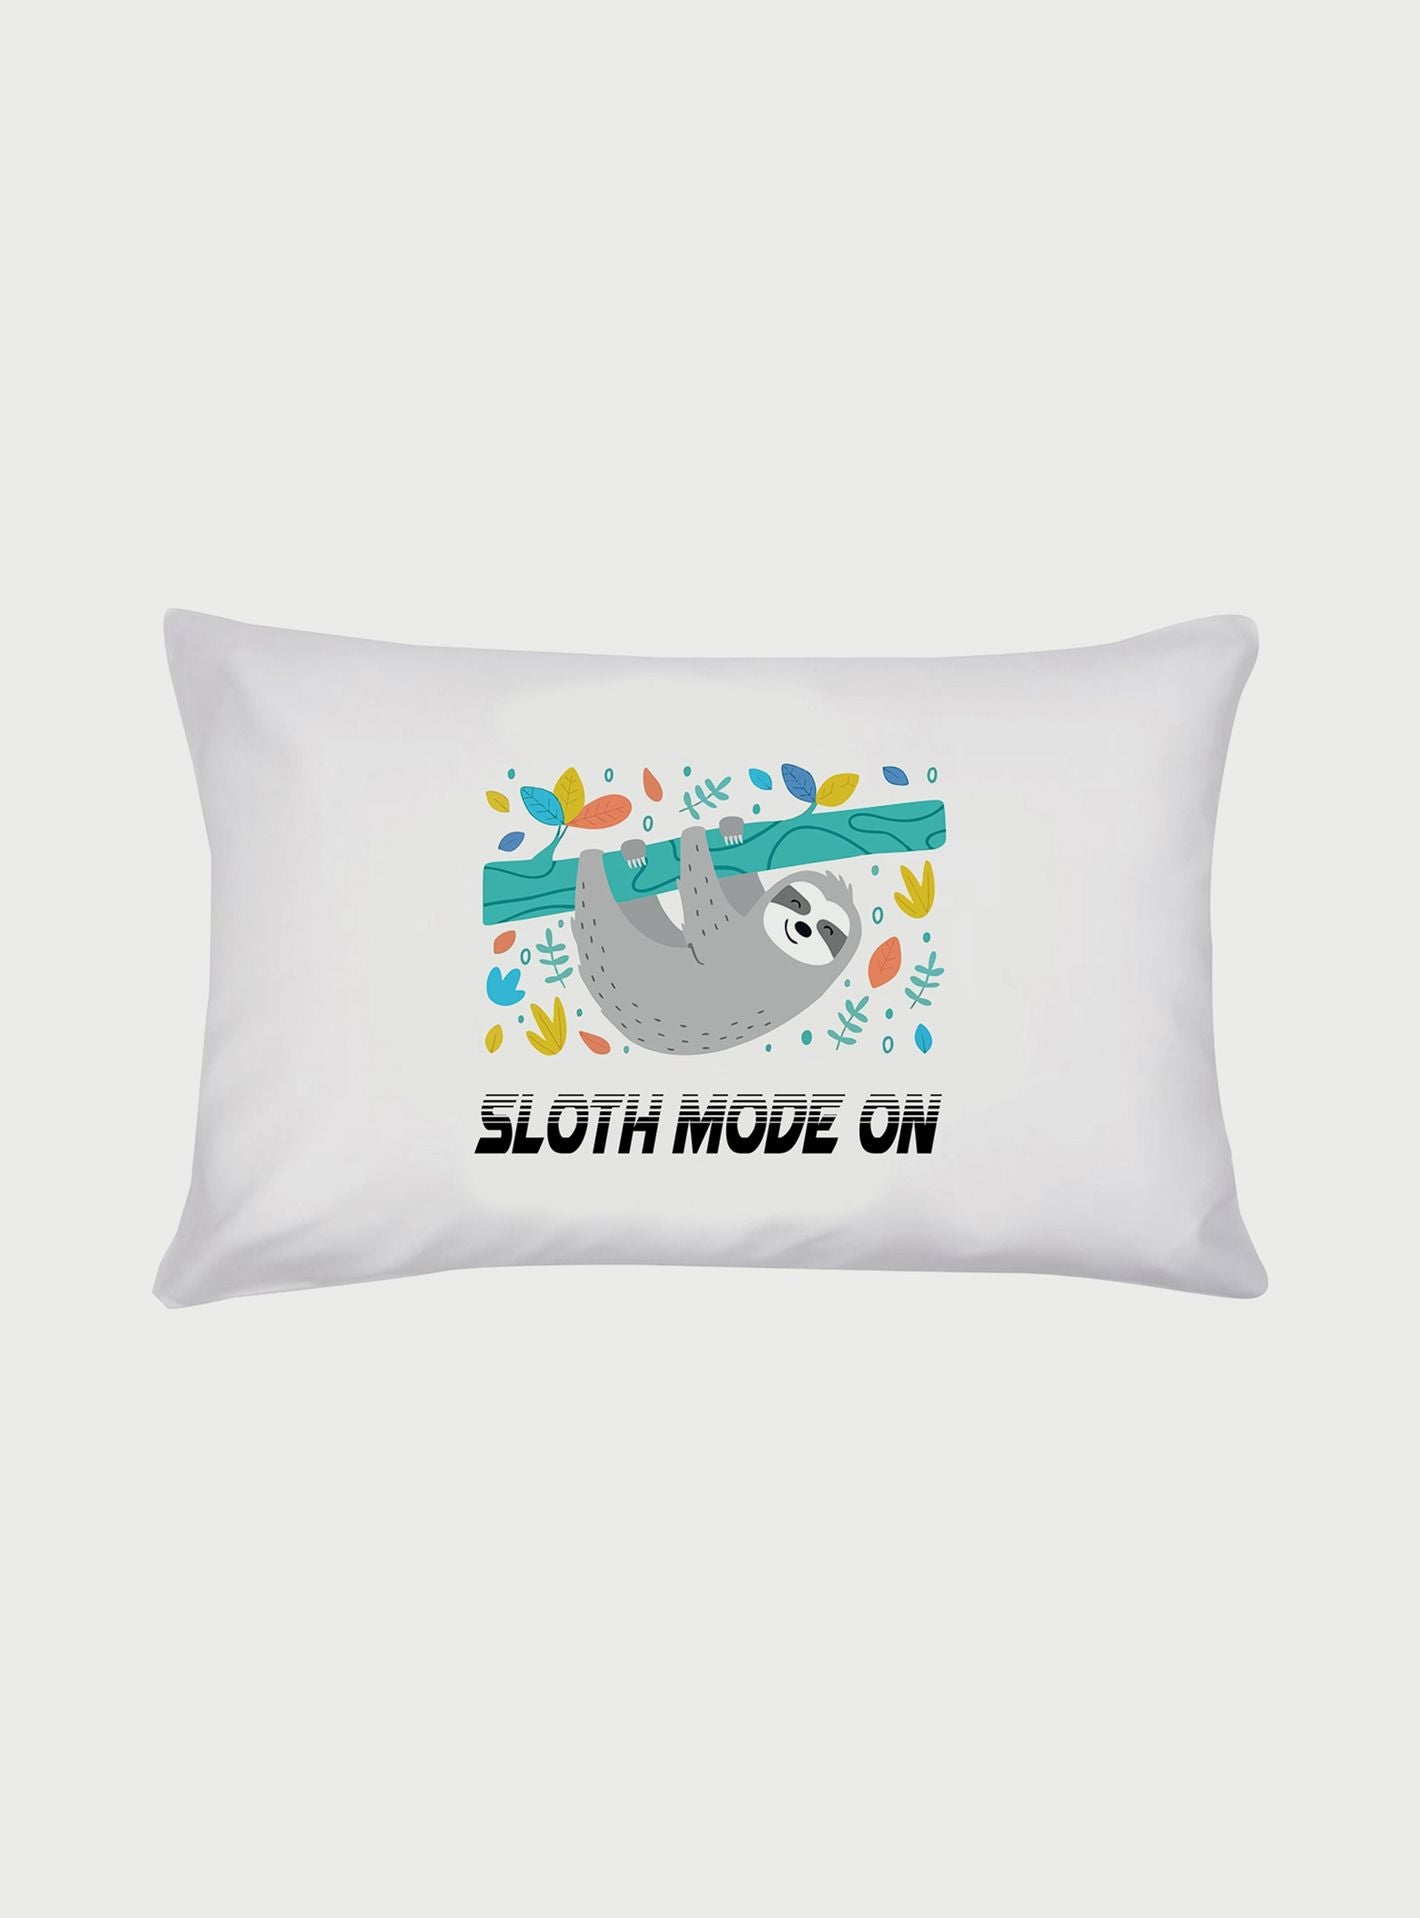 Pikkaboo Pillowcase Cover for Kids - Sloth - Laadlee